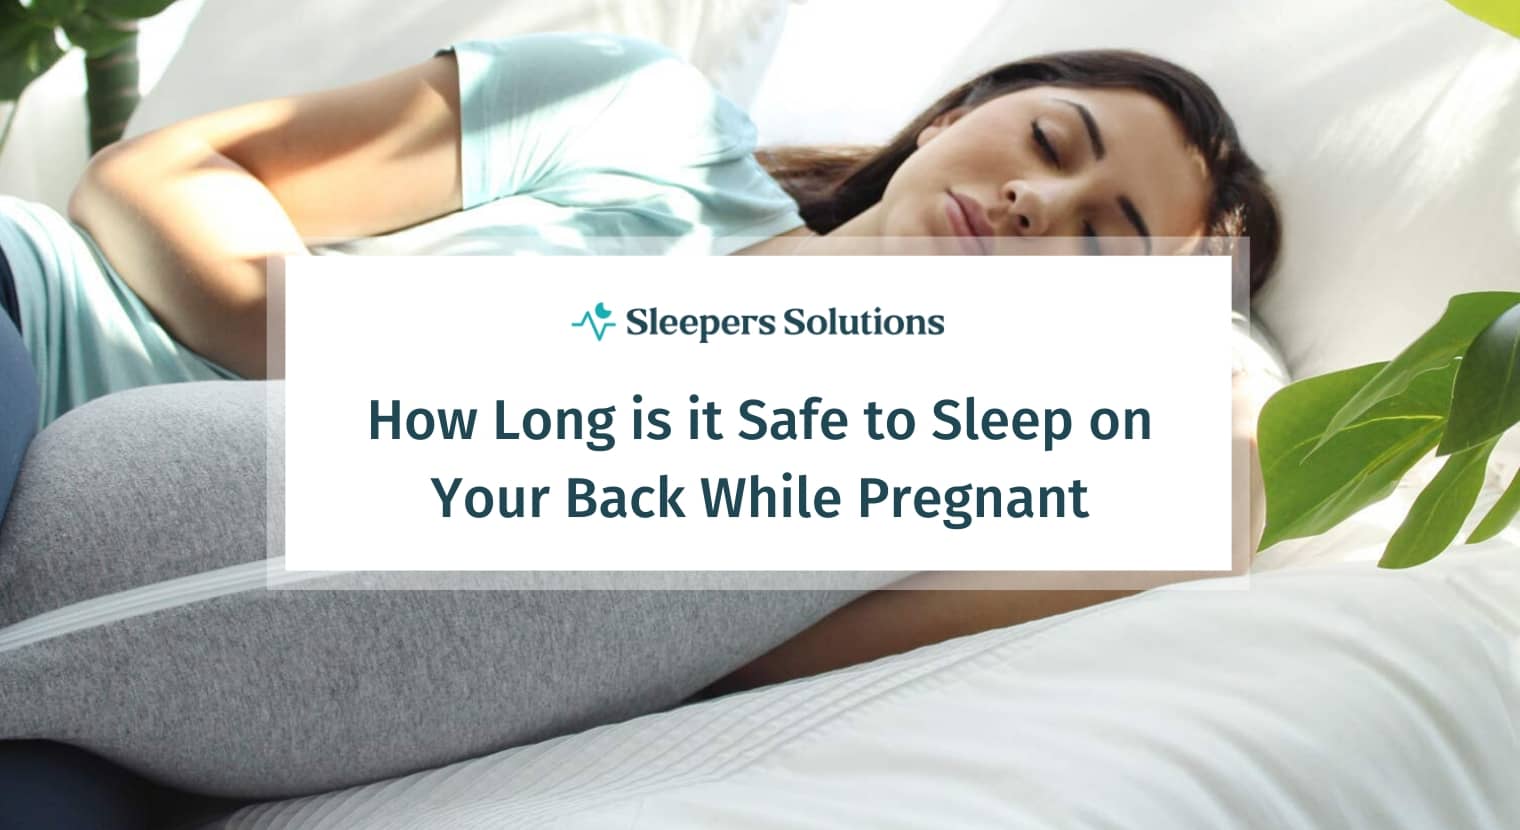 How Long is it Safe to Sleep on Your Back While Pregnant?